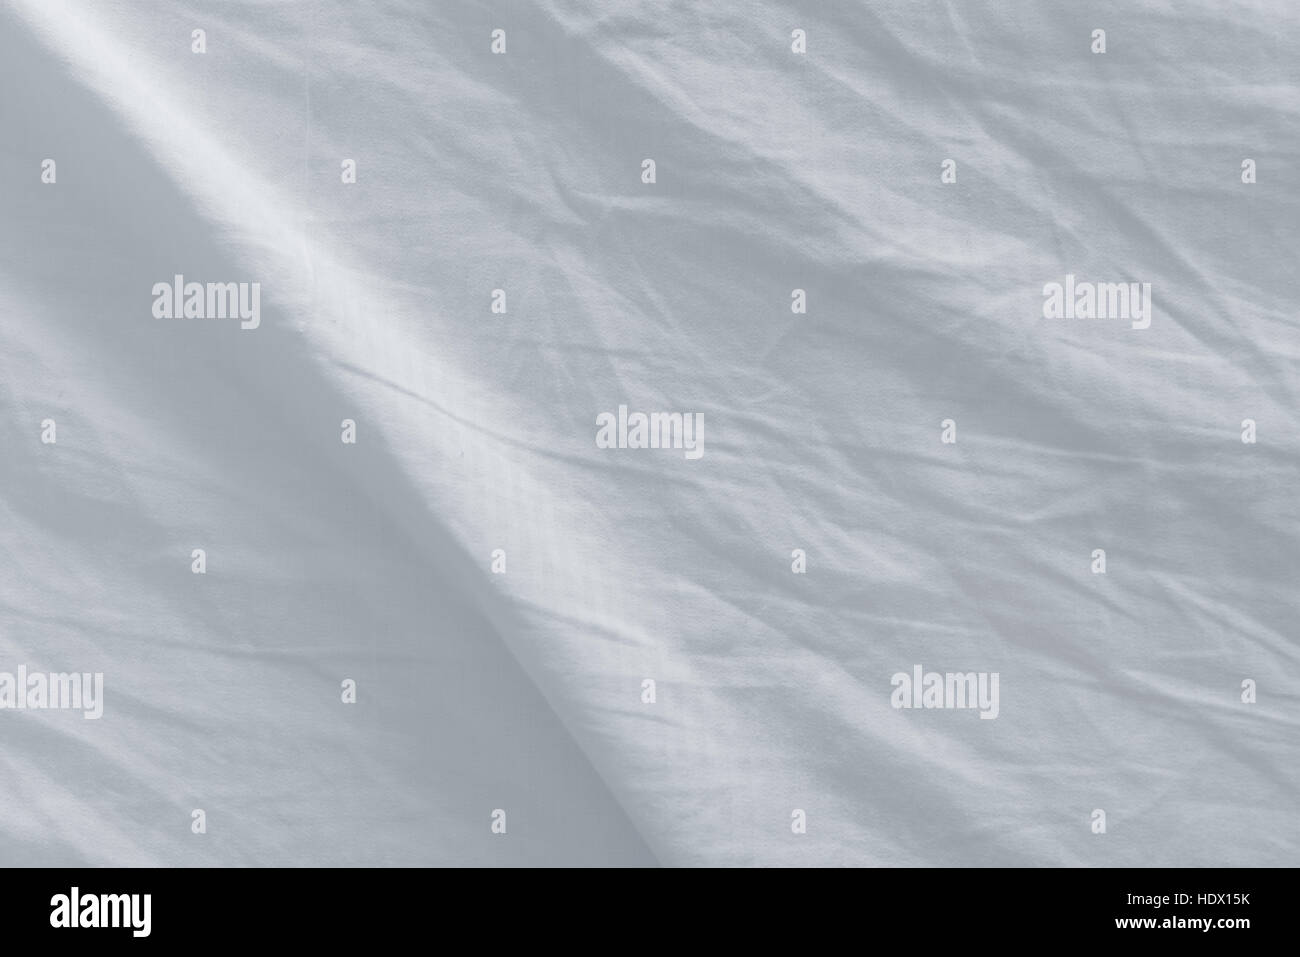 Bed sheets after sleep, top view texture of unmade bedding Stock Photo